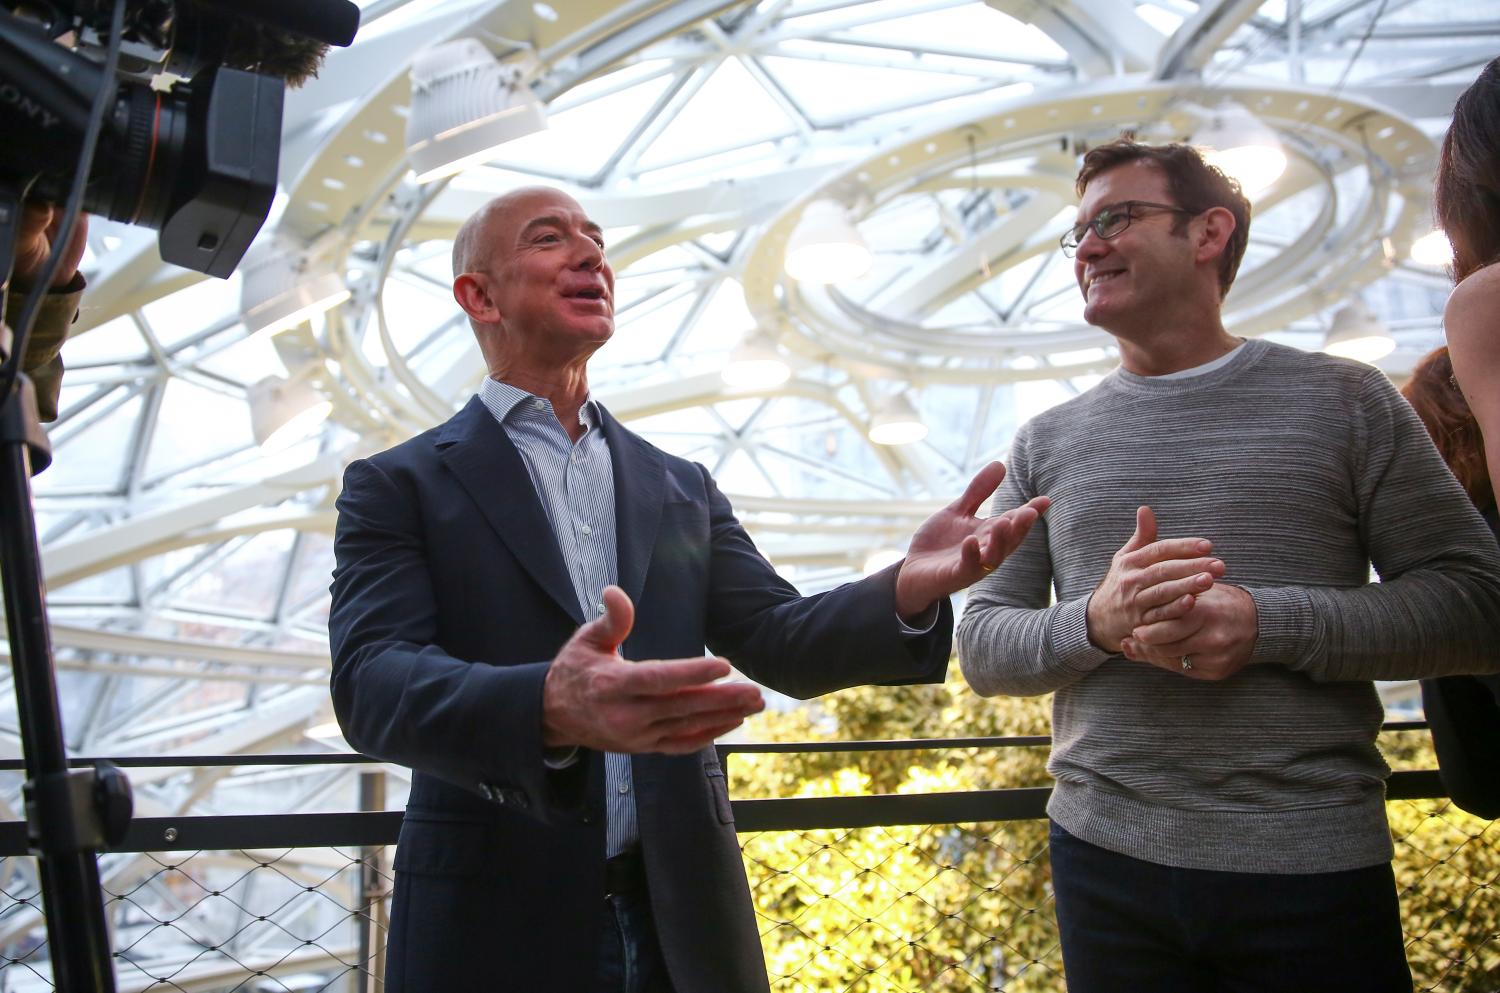 Amazon founder and CEO Jeff Bezos (L) answers a question from the media while getting a tour from Ron Gagliardo, senior manager of horticultural services for the Spheres, during the Amazon Spheres opening event at Amazon's Seattle headquarters in Seattle, Washington, U.S., January 29, 2018.  REUTERS/Lindsey Wasson - RC15E4464090